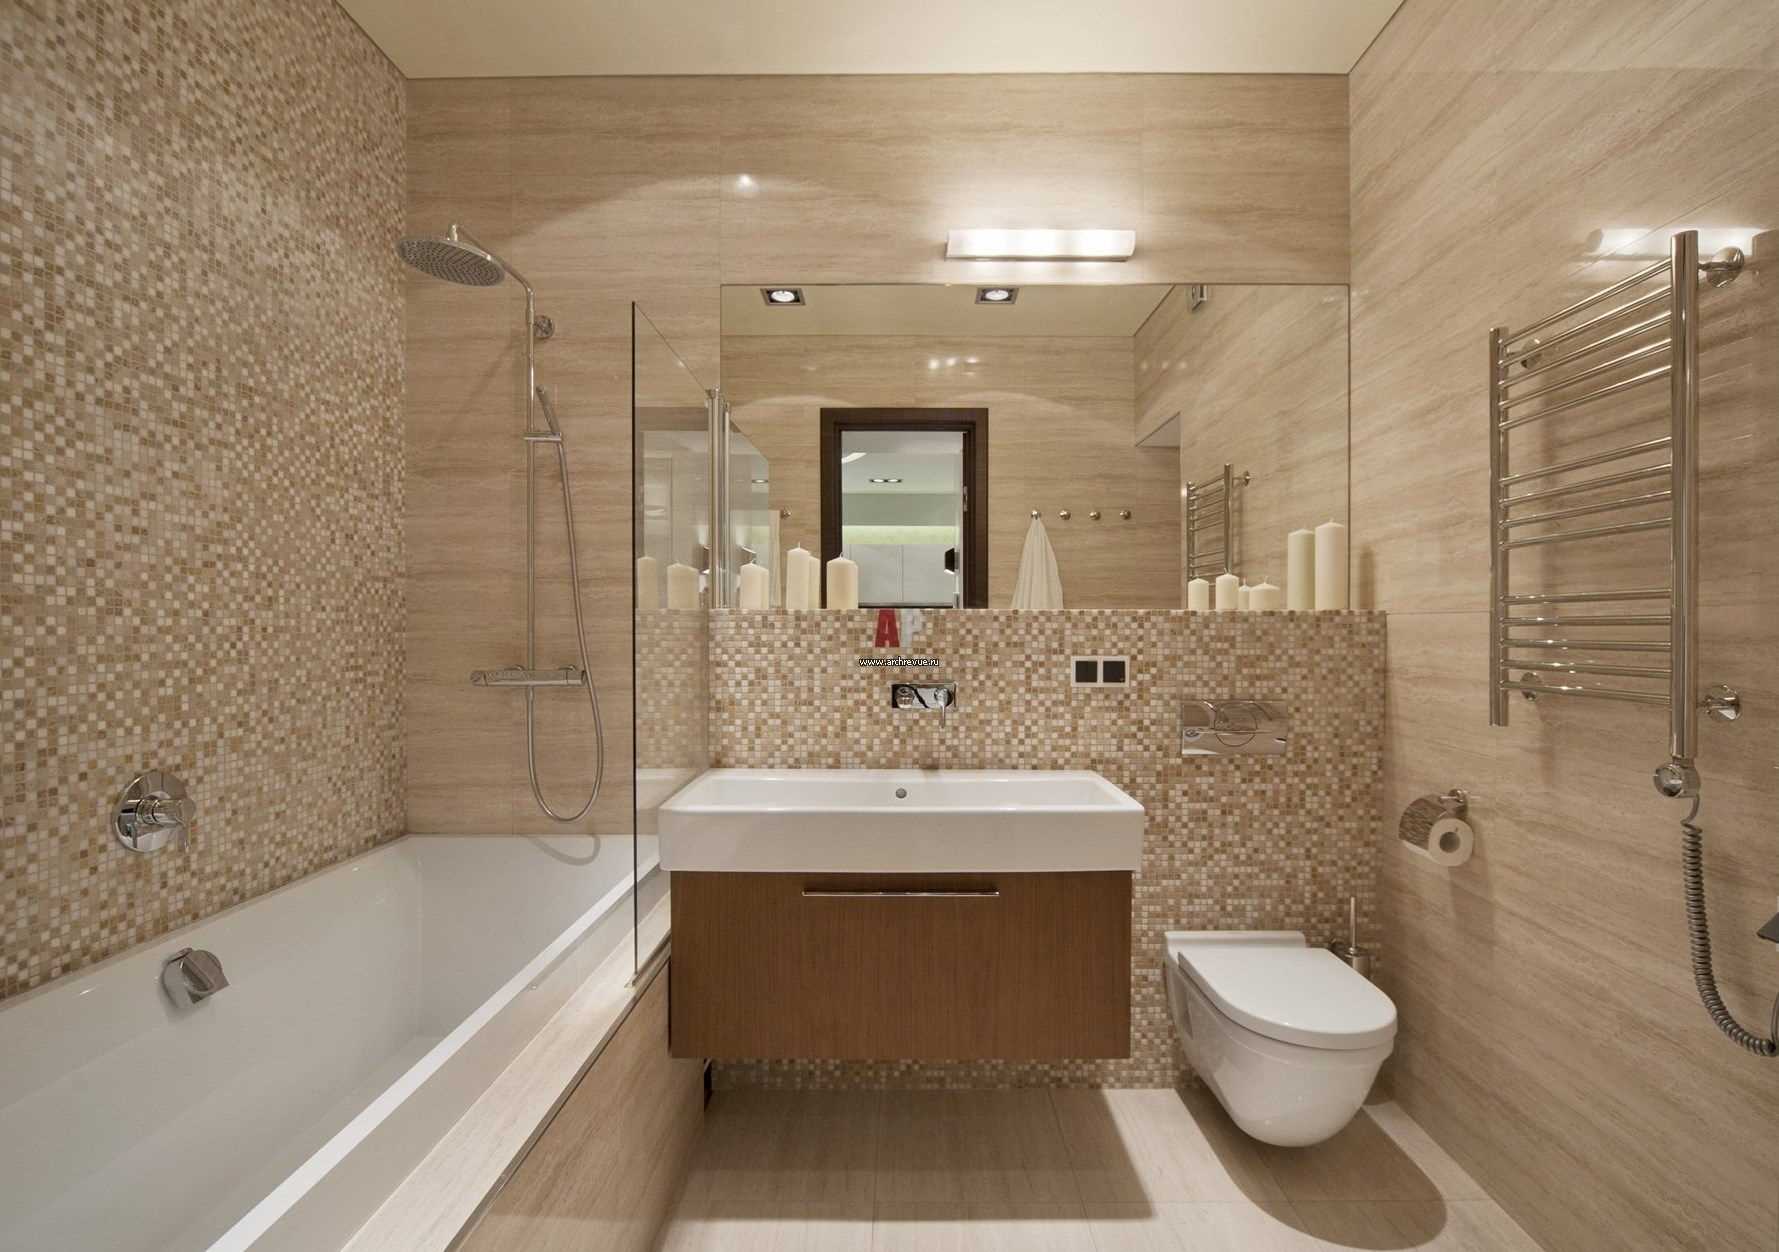 version of the bright interior of the bathroom 2017